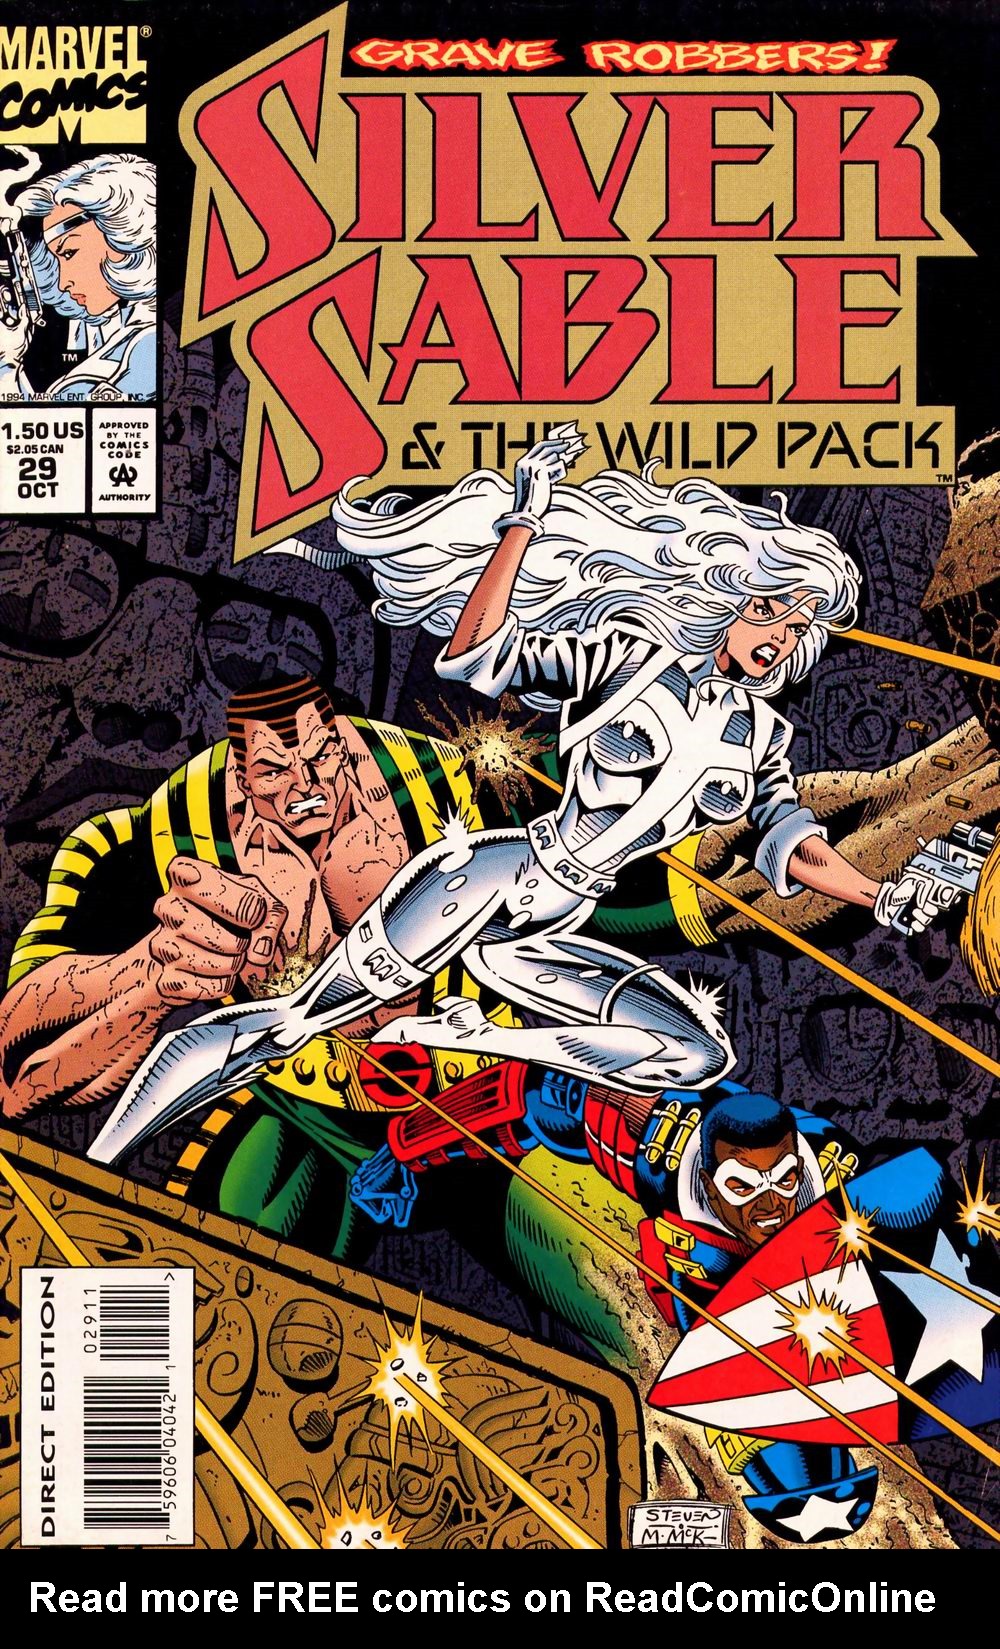 Read online Silver Sable and the Wild Pack comic -  Issue #29 - 1